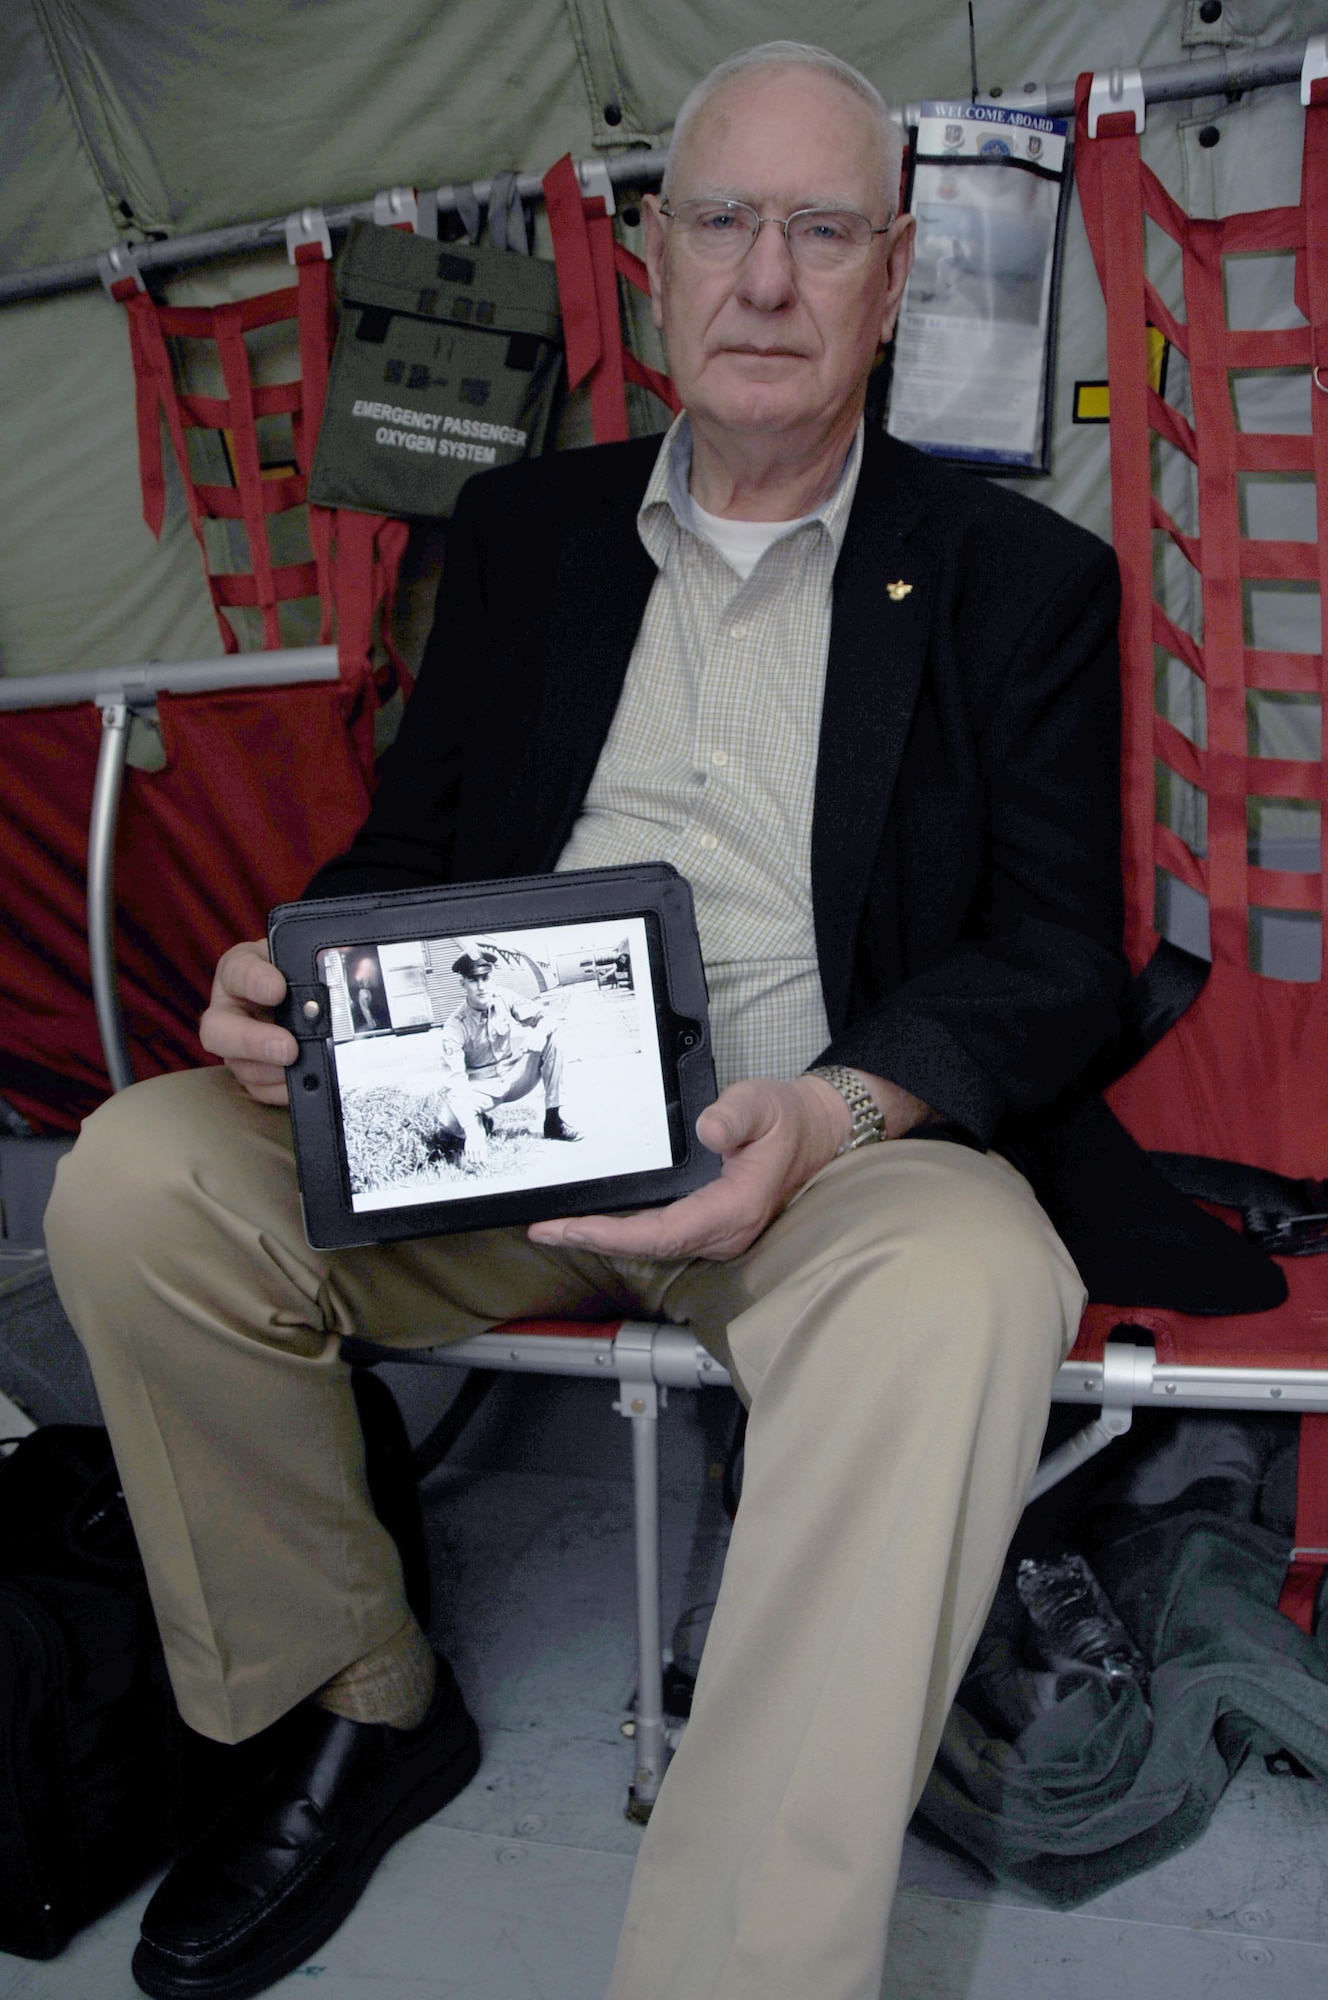 MACDILL AIR FORCE BASE, Fla. – Instead of carrying a wallet full of pictures, 87 year-old James Watland has kept up with the times.  He shows off a picture of himself on his computer these days.  Watland served in the Air Force from 1952-1962, and was one of the first to fly in the same type of aircraft he sits in today.  Watland had an opportunity to relive old memories during an orientation flight for employers and civic leaders hosted by the 927th Air Refueling Wing, a reserve unit at MacDill recently. (Official U.S. Air Force photo by Staff Sgt. Shawn Rhodes)